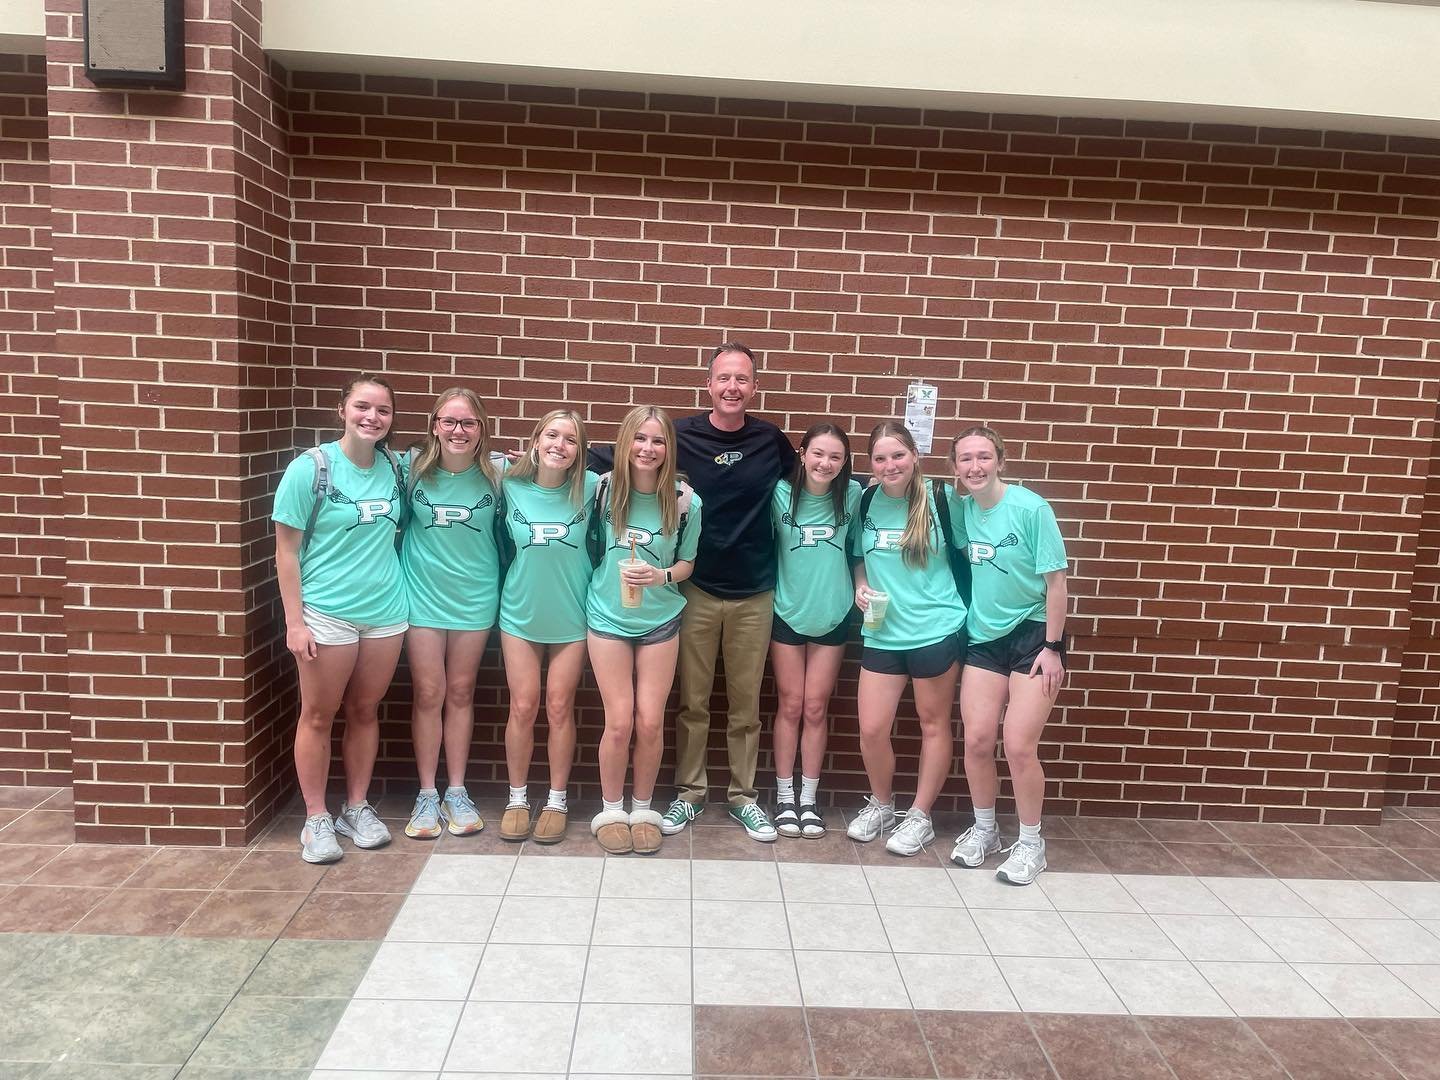 PROSPER HIGH SCHOOLS PRINCIPAL SUPPORTS PROSPER LACROSSE!!!!! Be at our send off in an hour and 9 minutes or never talk to us again!! #goprosper #ourprincipaliscool #state